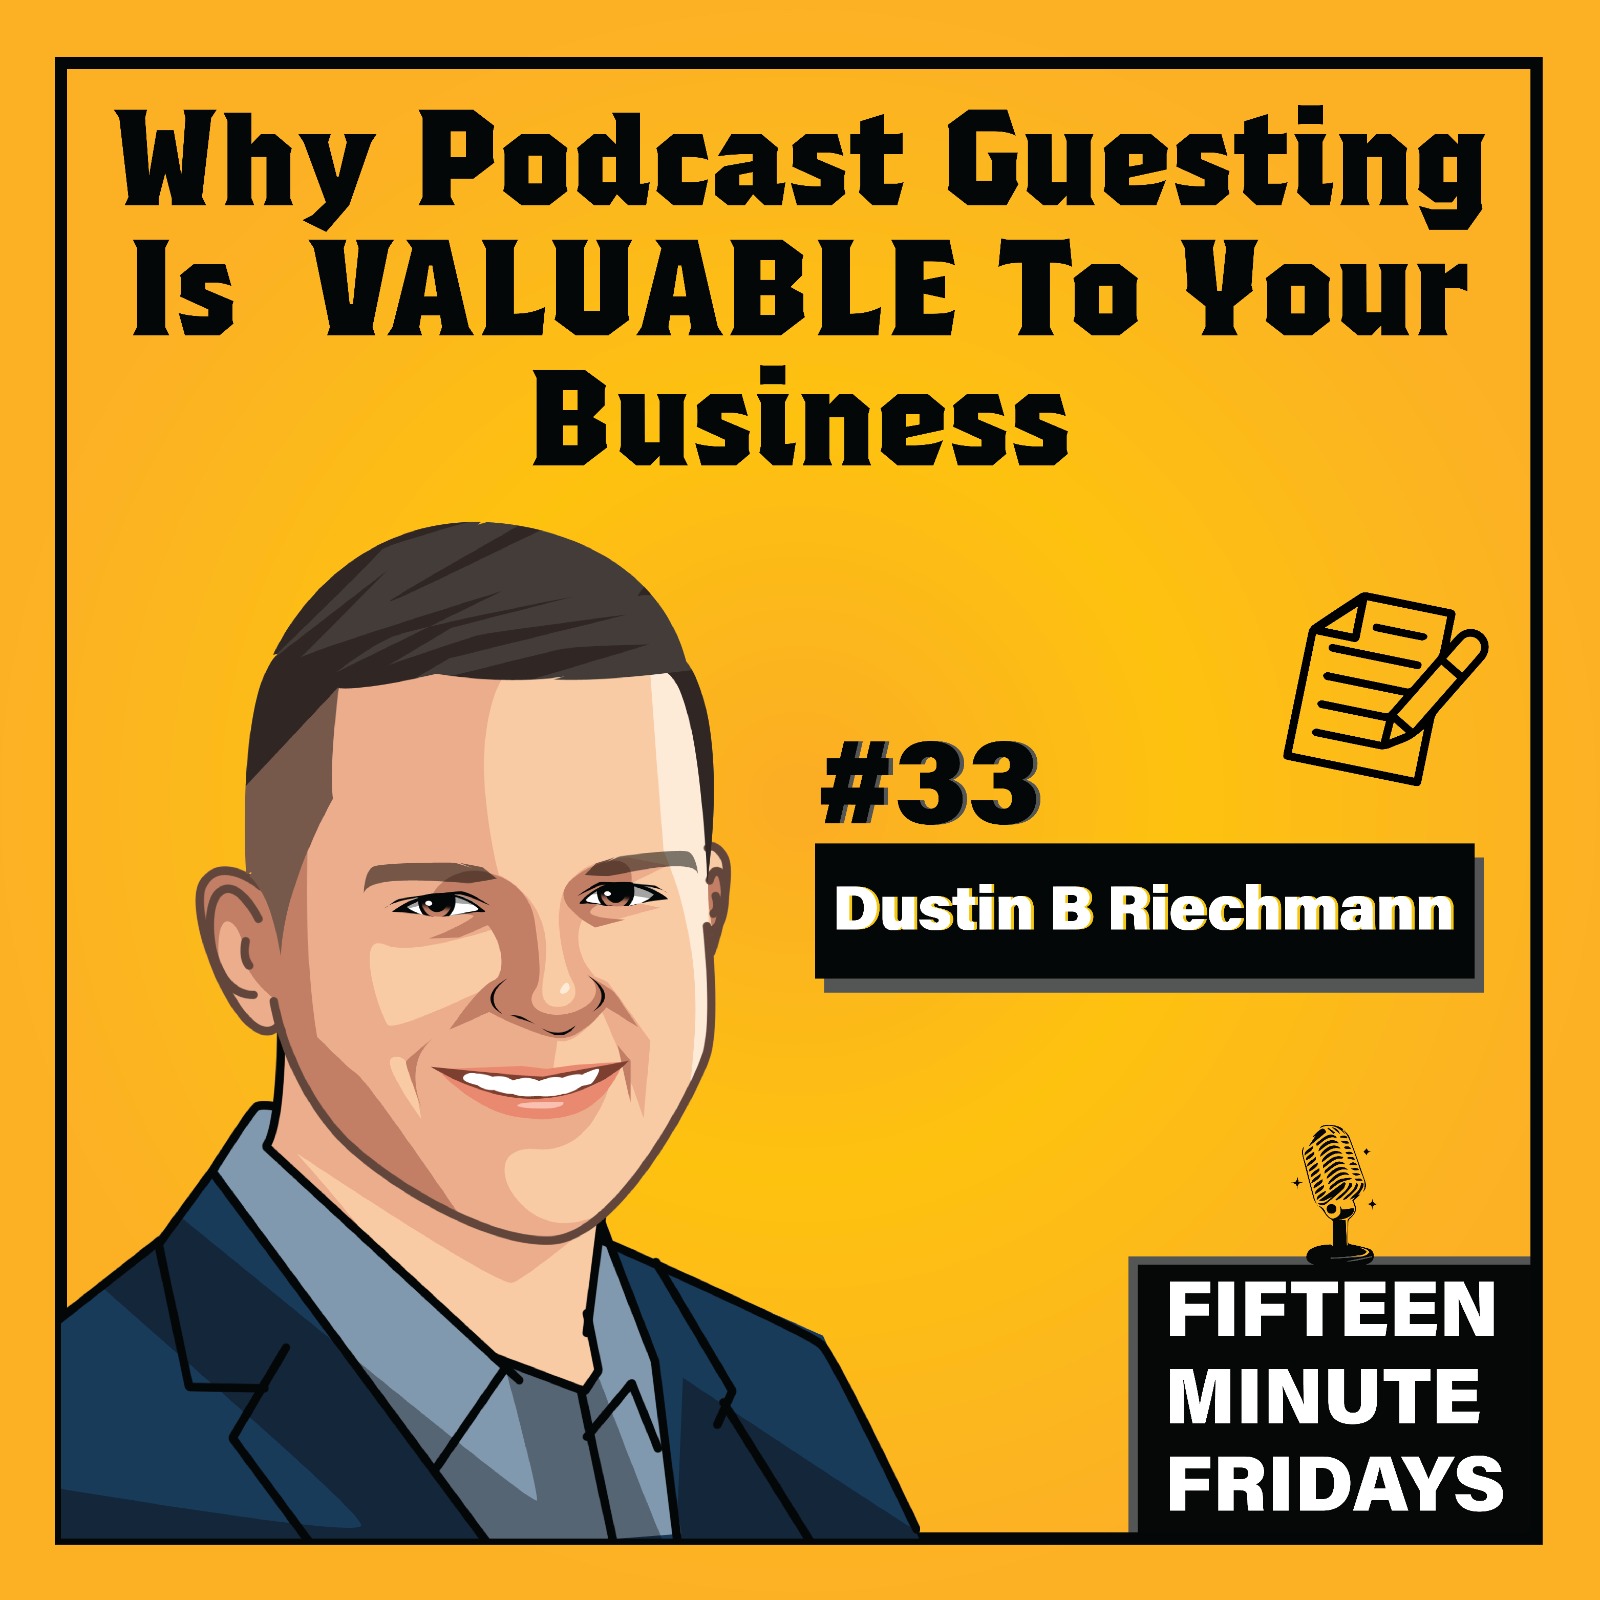 Dustin B Riechmann || Why Podcast Guesting Is VALUABLE To Your Business